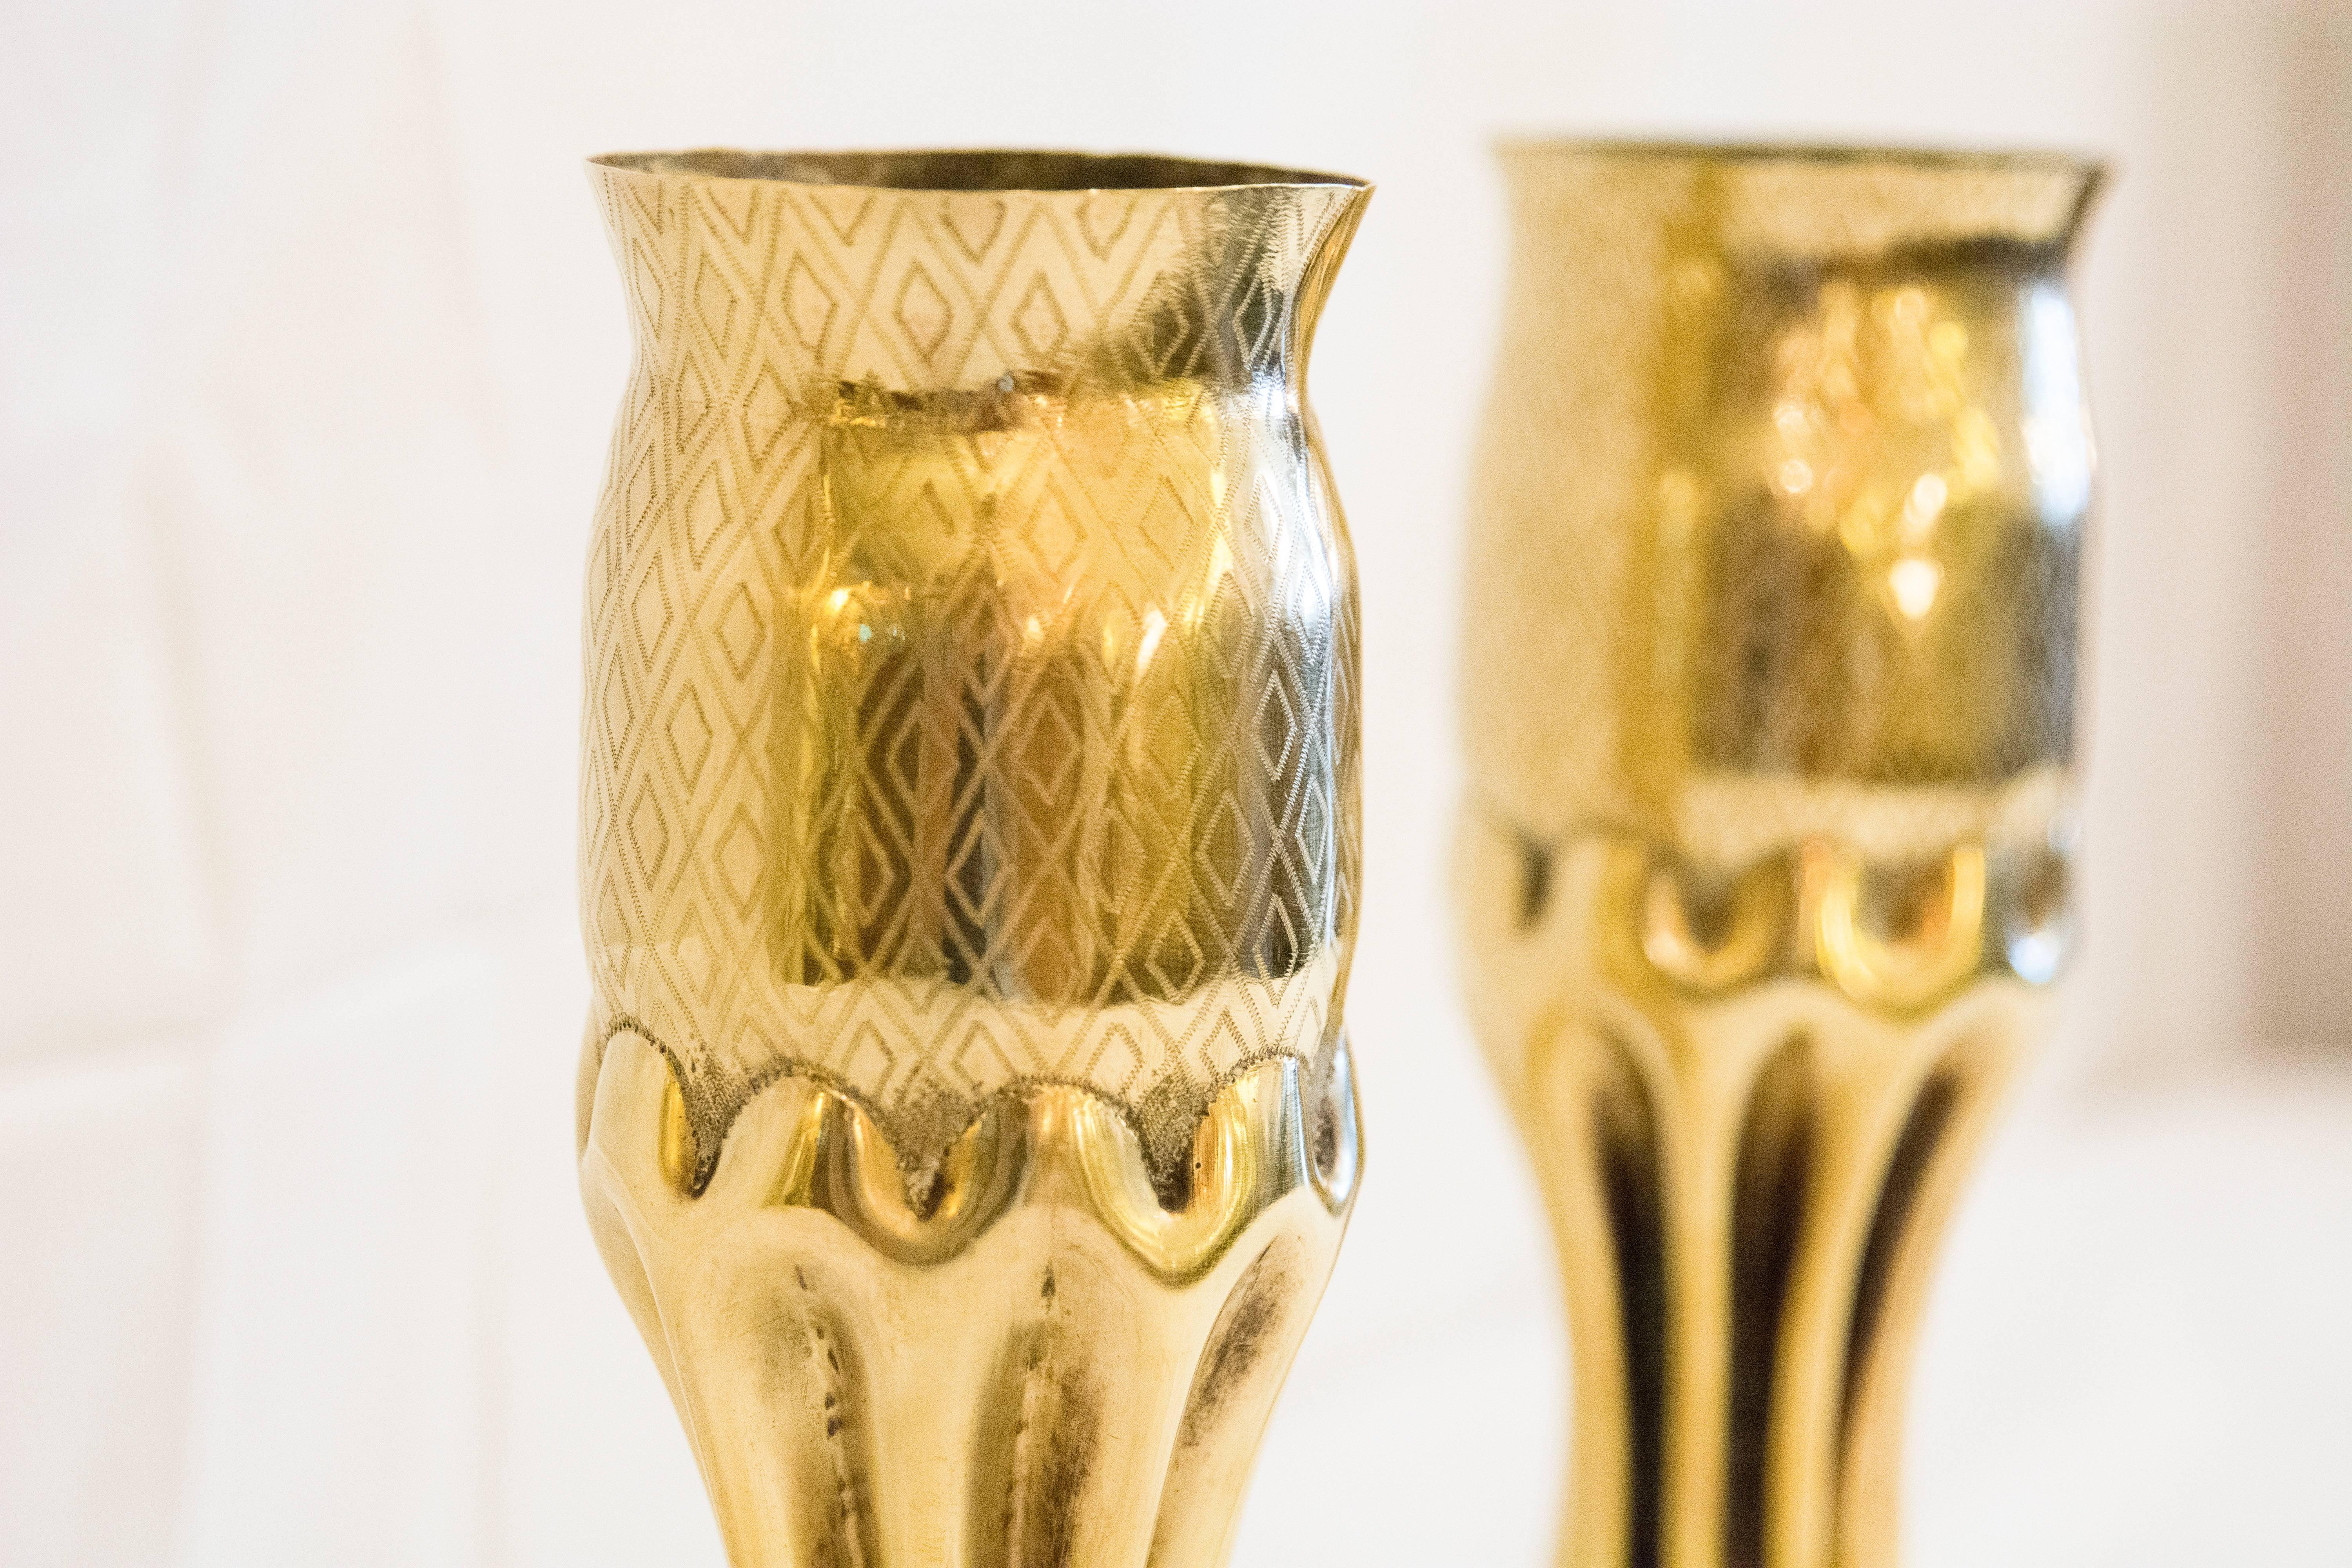 Pair of WWI trench art vases with deep fluting and intricate pineapple detailing on top. British 13Pr 9cwt shells, 1916 & 1917. 